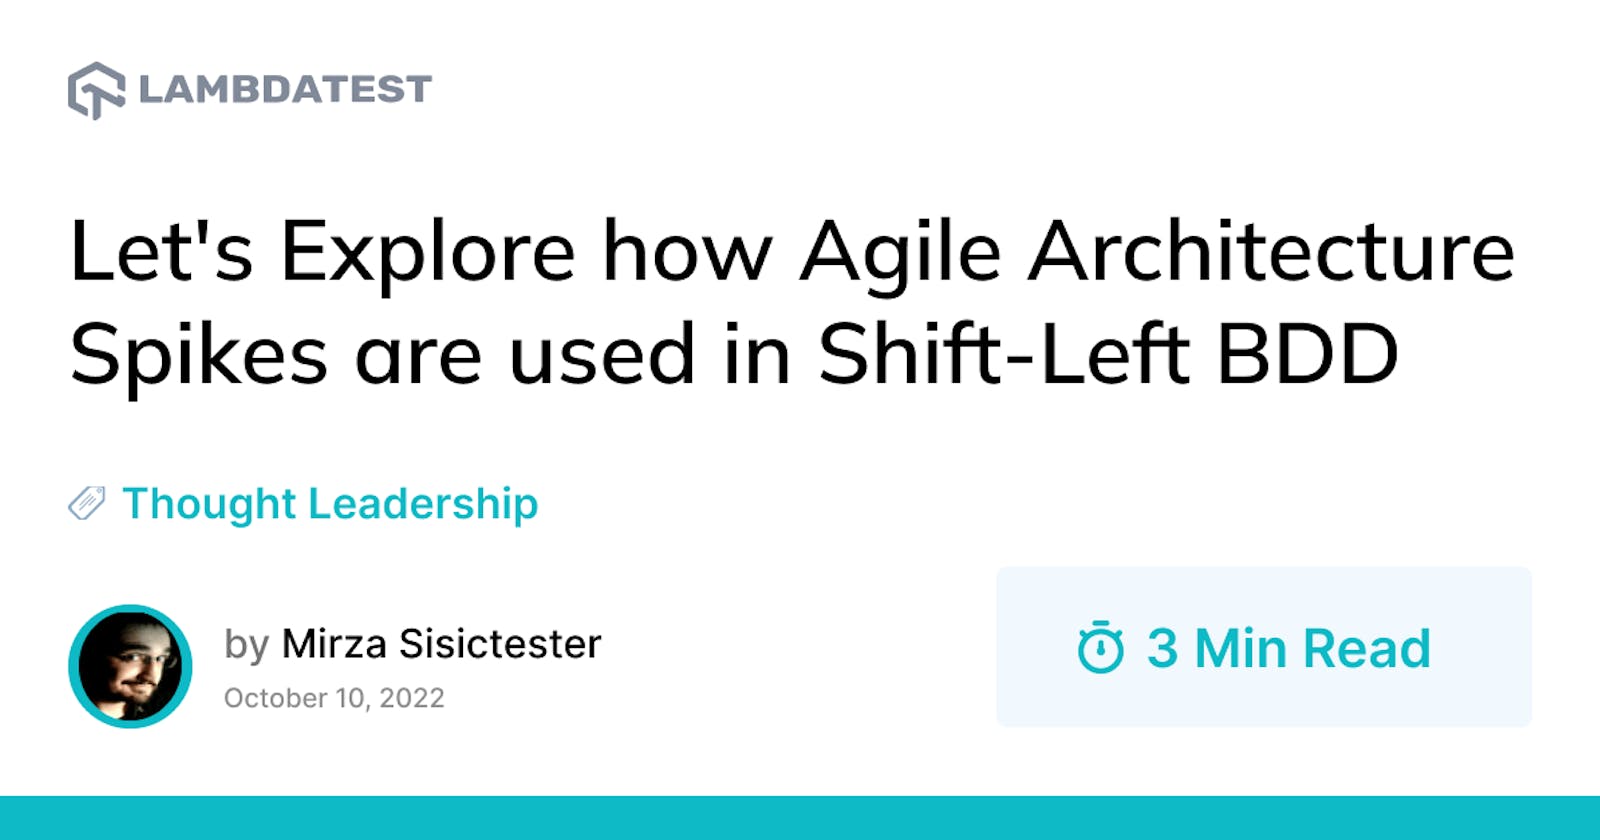 Let’s Explore how Agile Architecture Spikes are used in Shift-Left BDD